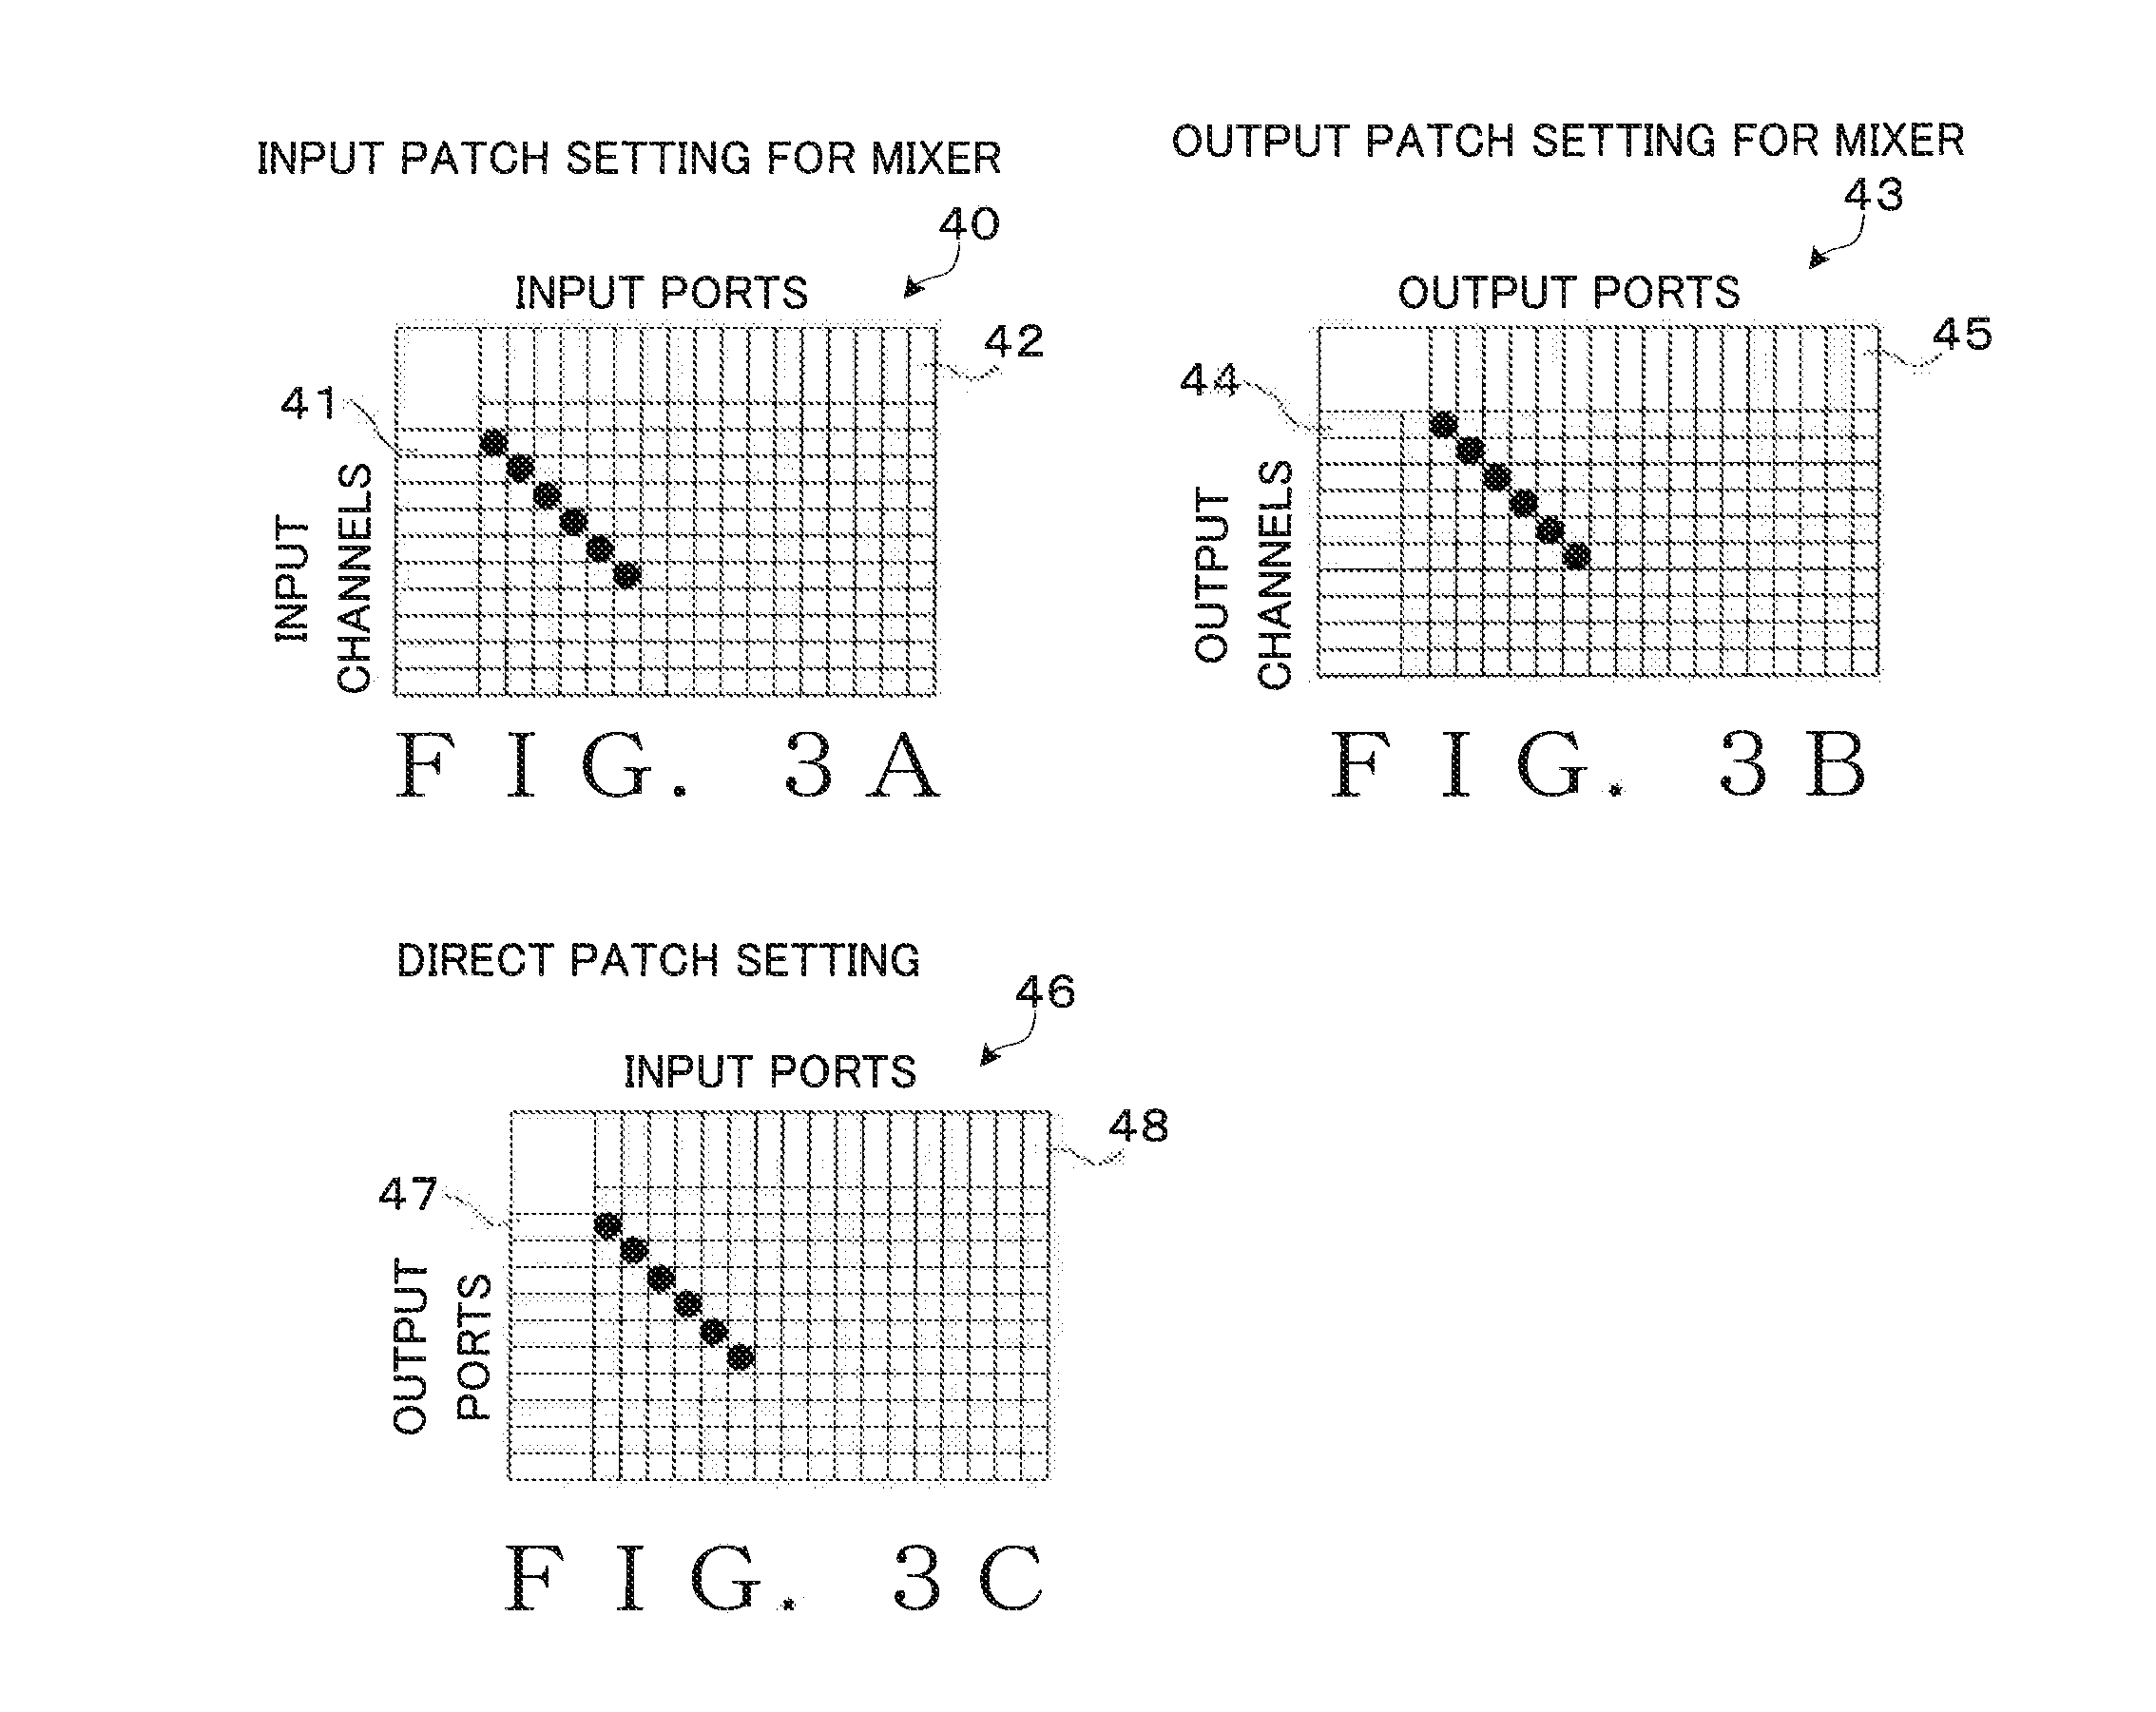 Managing input/output ports in mixer system using virtual port data